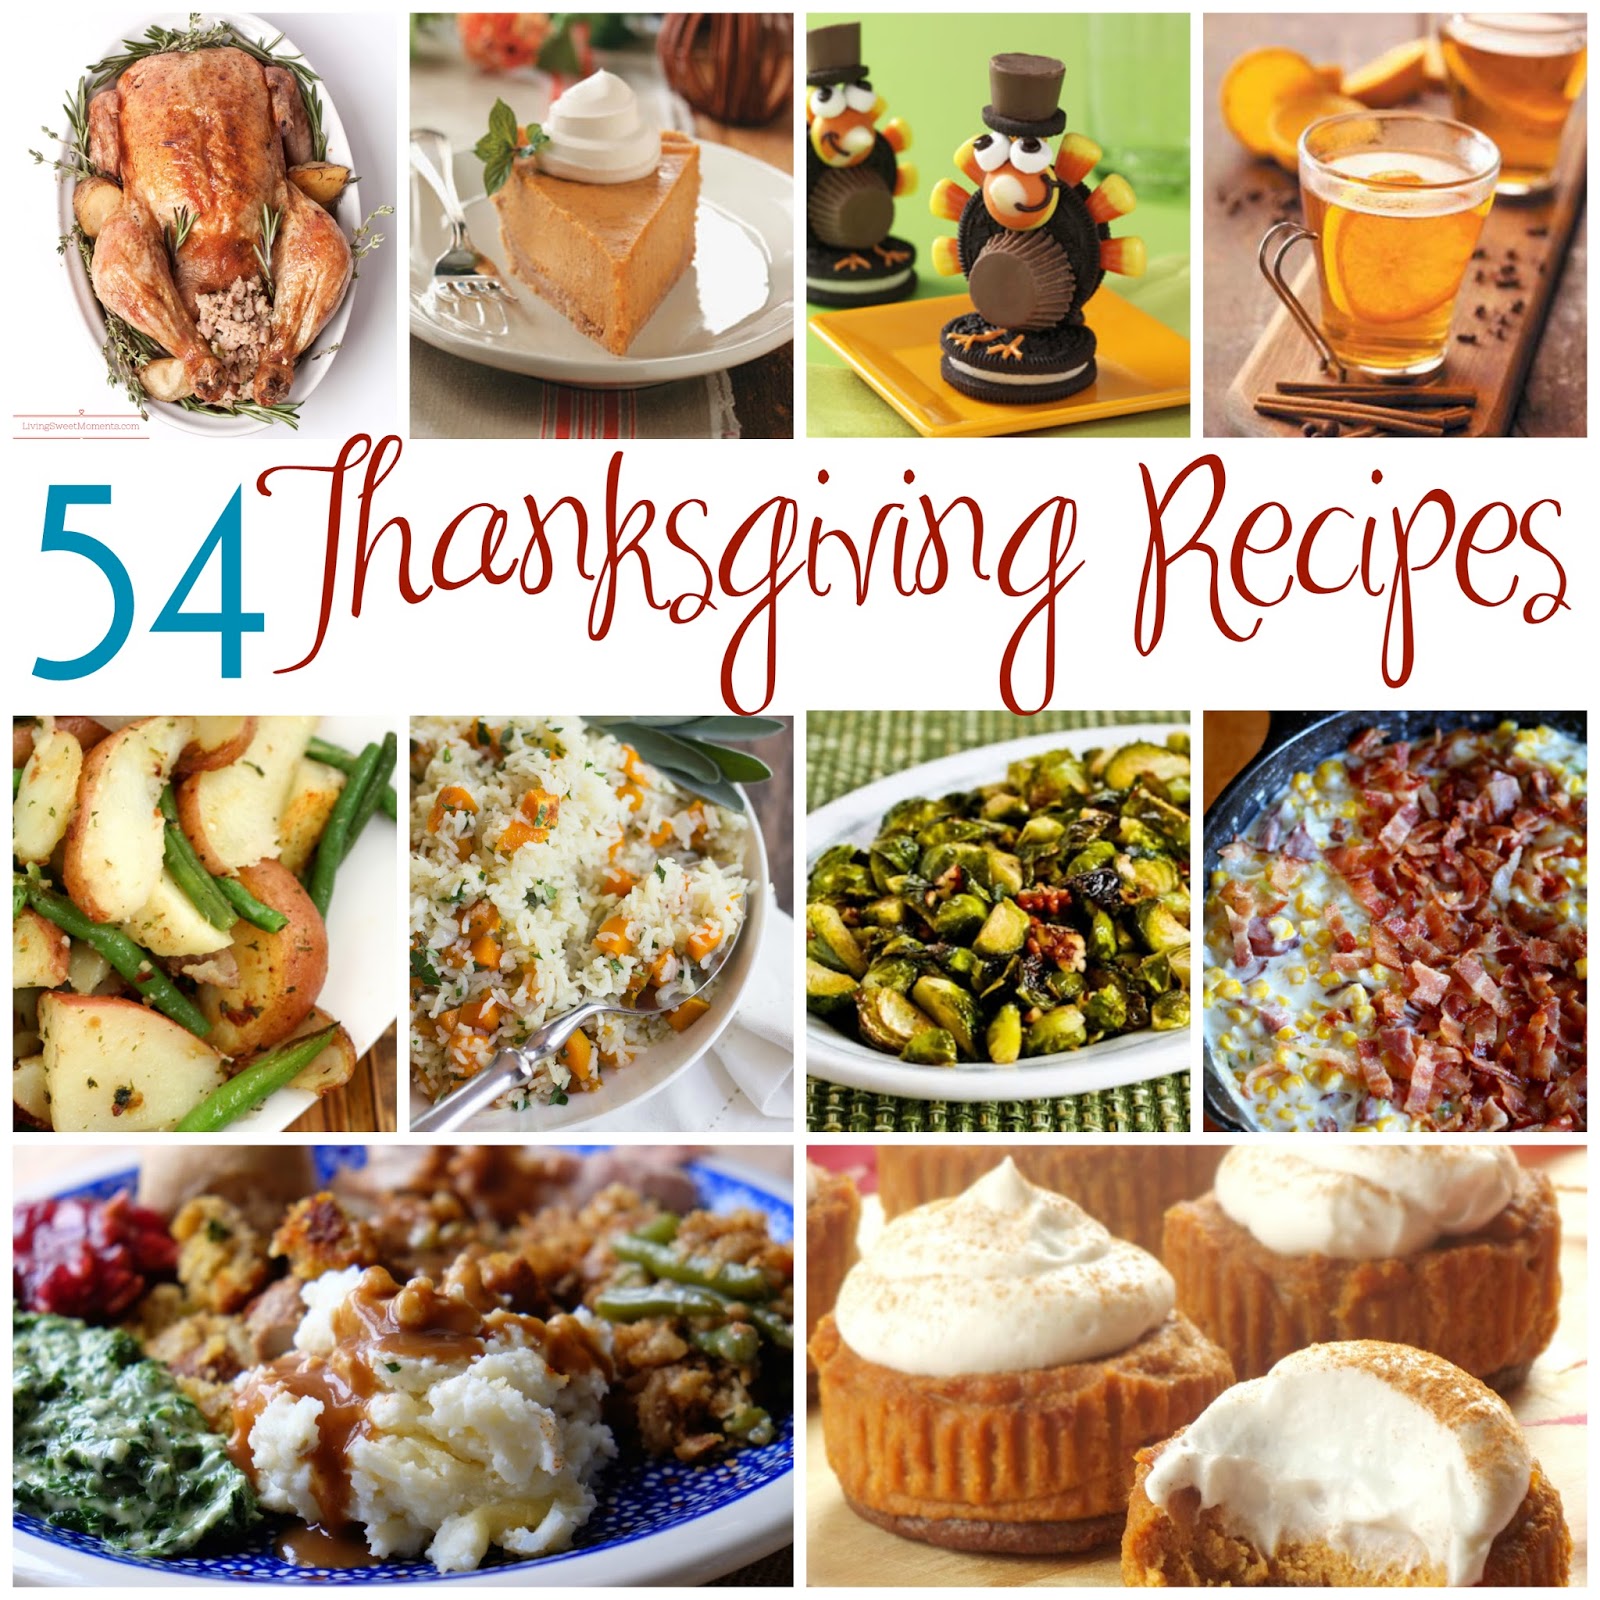 54 Thanksgiving Recipes - Something for Everyone! - Mom Needs Chocolate